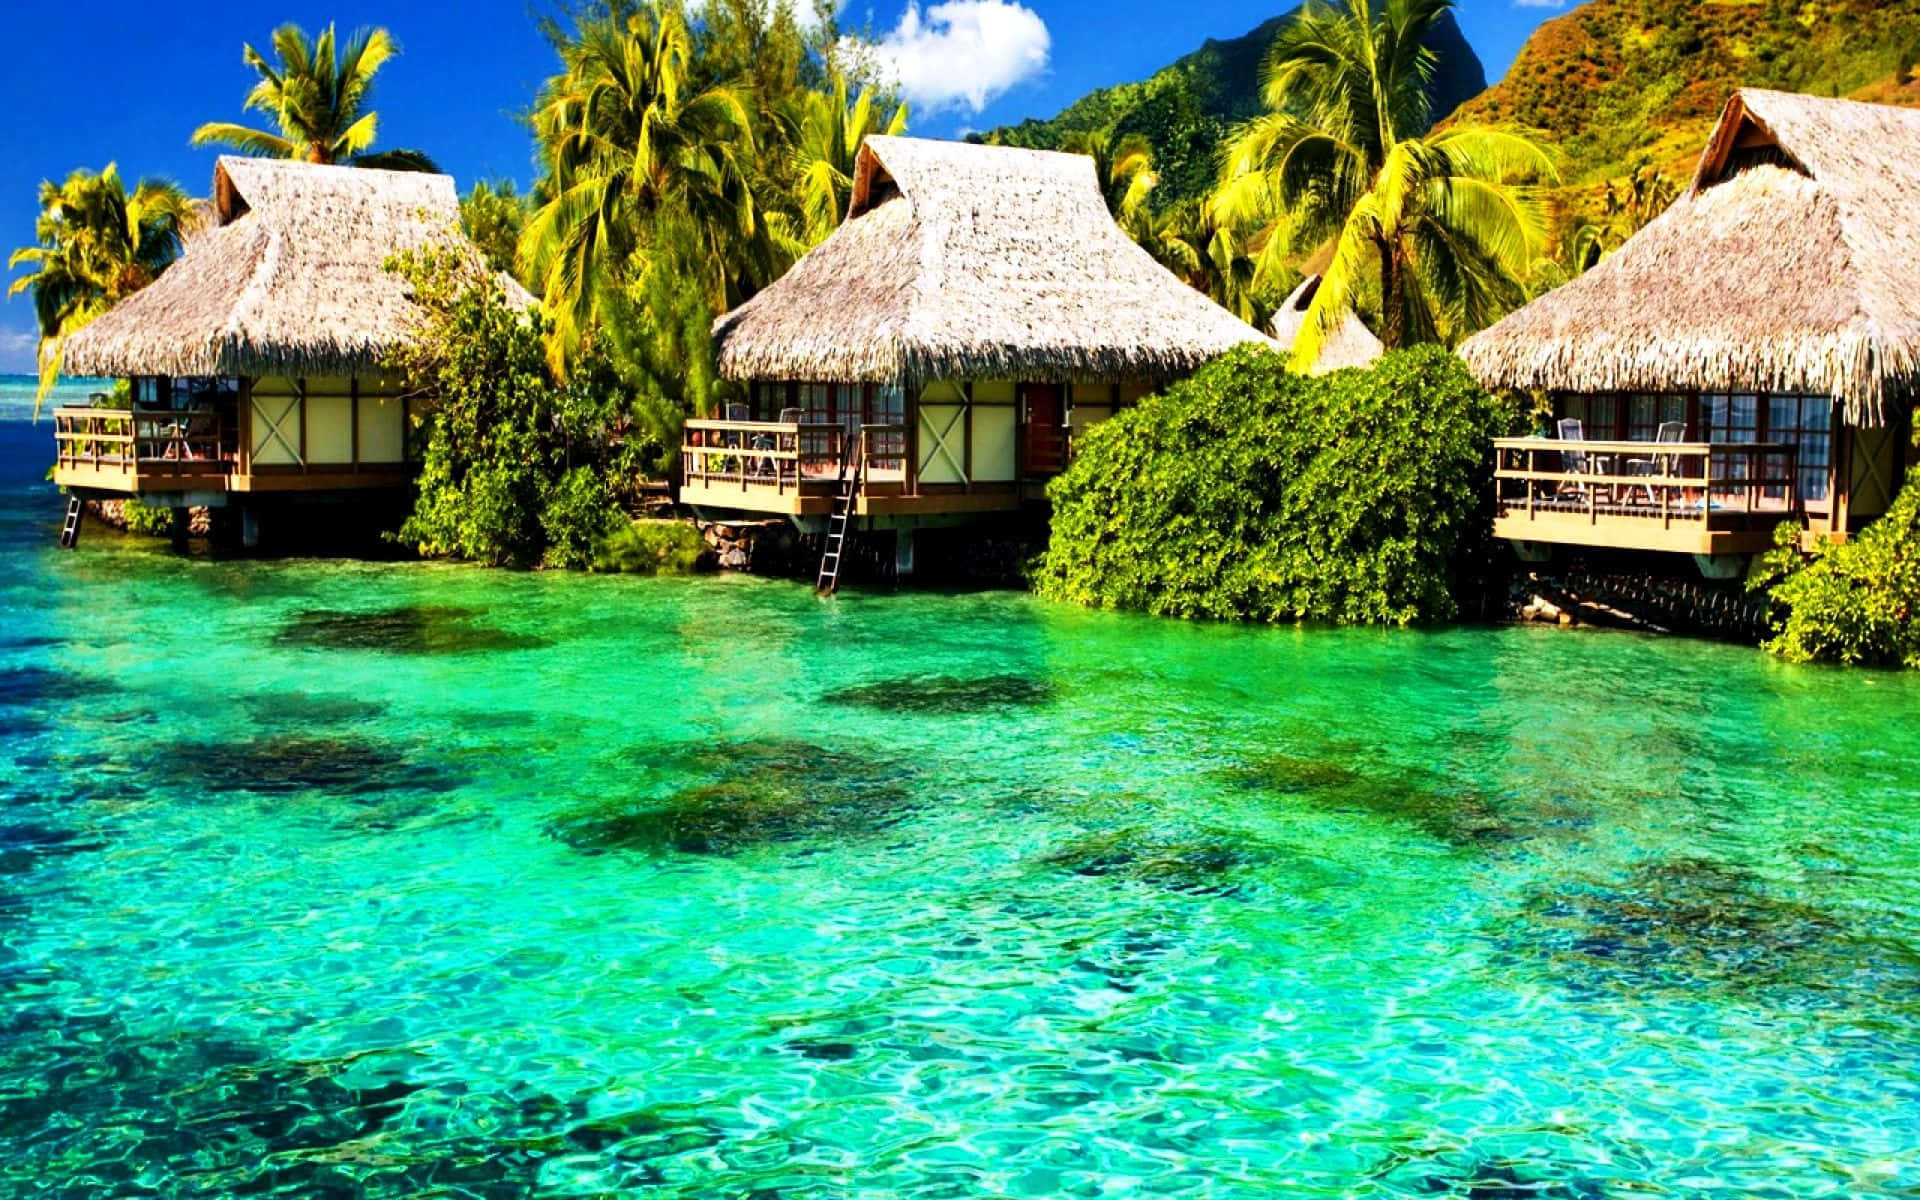 A Tropical Island With Huts And Clear Water